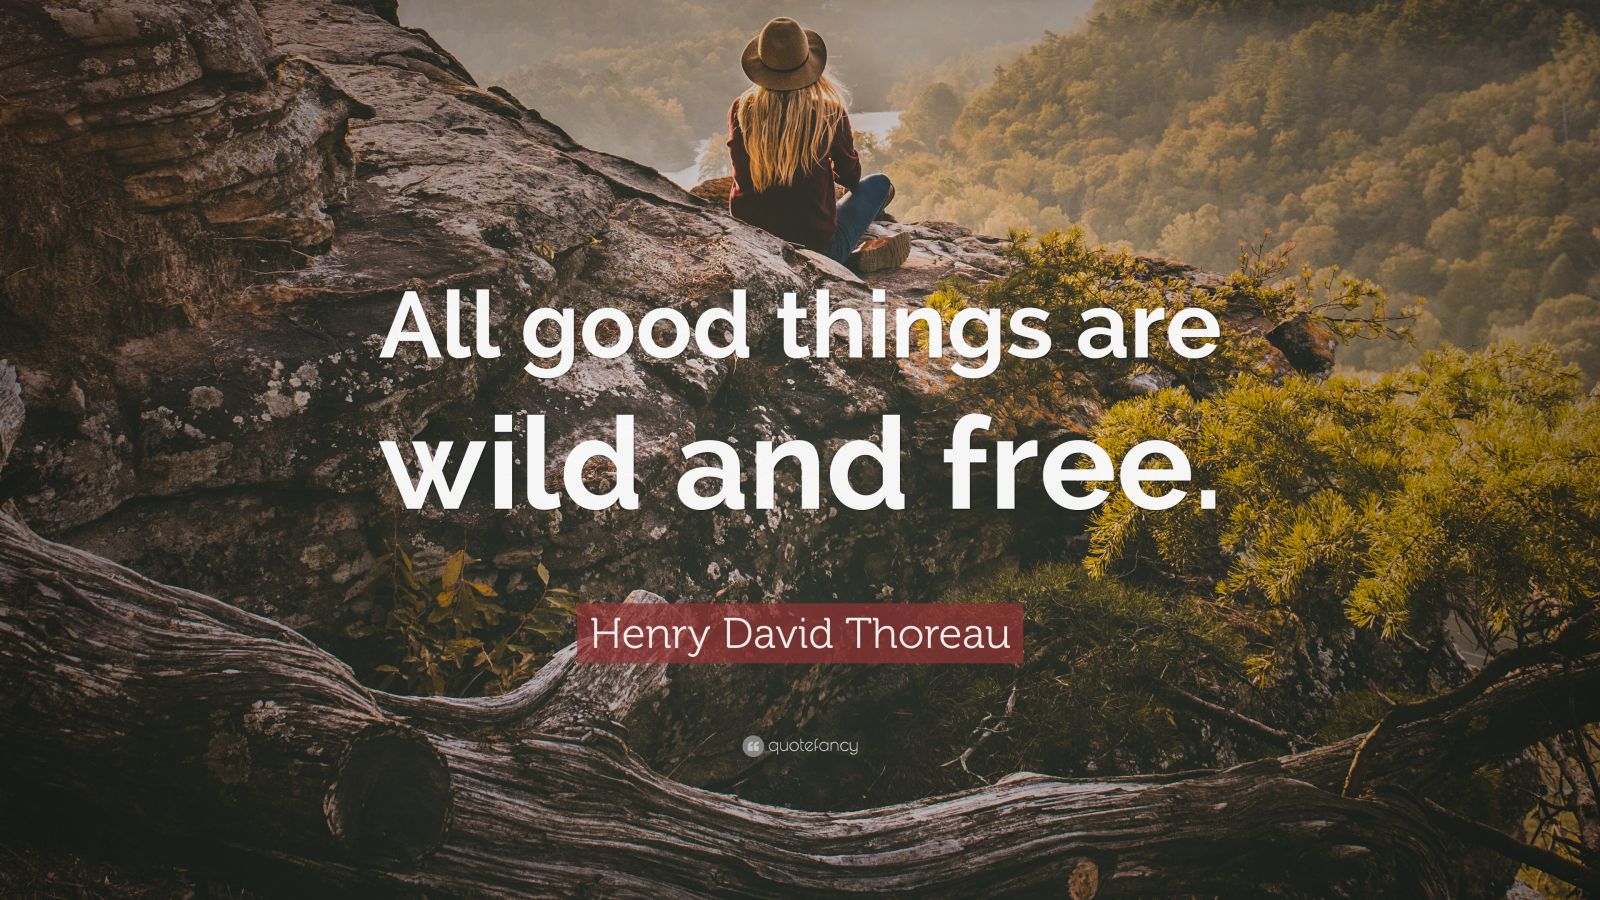 henry-david-thoreau-quote-all-good-things-are-wild-and-free-22